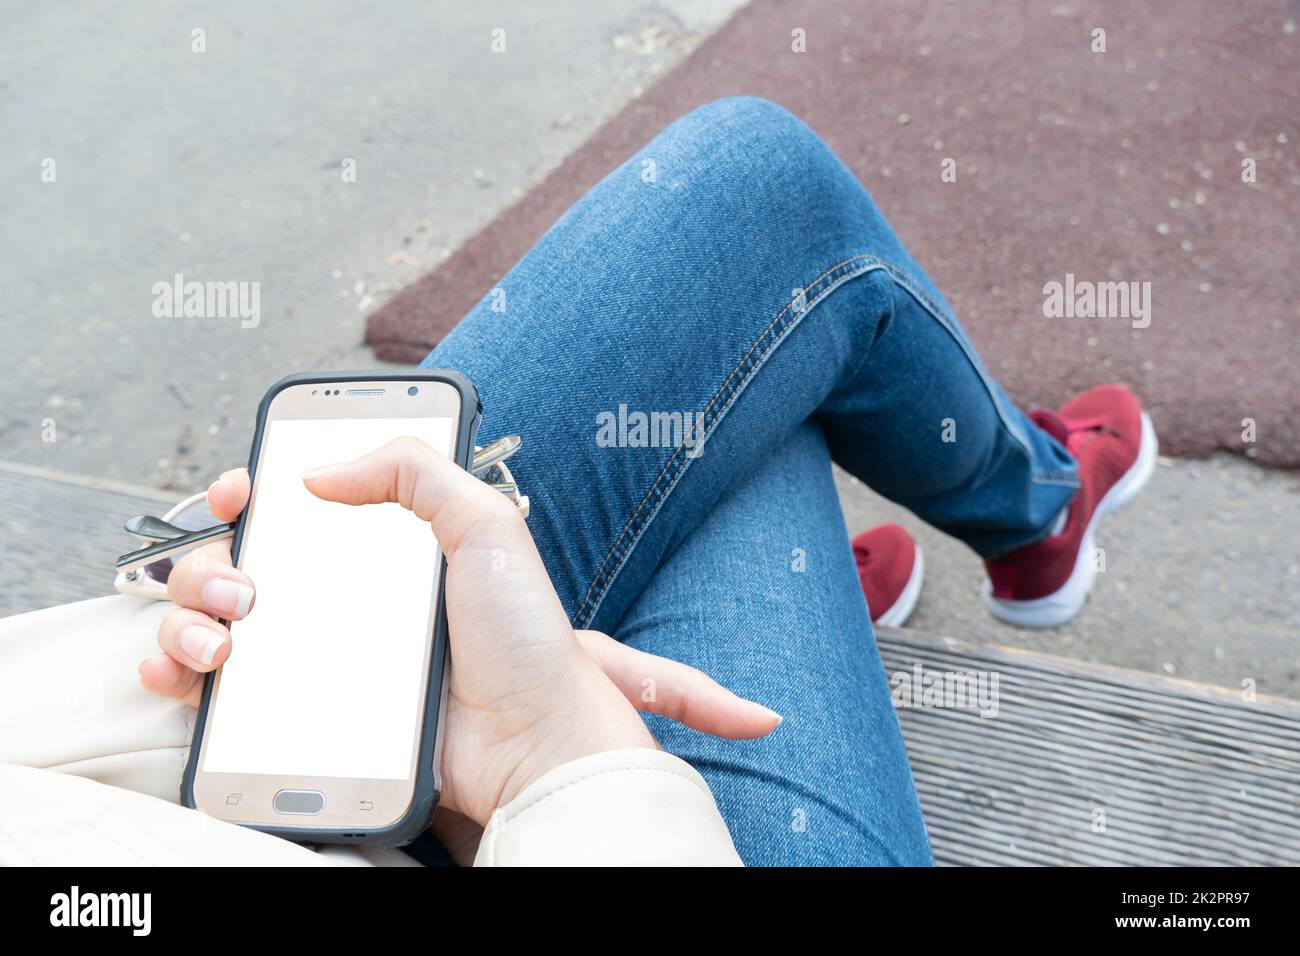 The girl holds in her hand a smartphone with a white screen for your layout or advertising on the phone display.A means of communication,communication and the Internet.Banner,billboard,poster,playbill Stock Photo